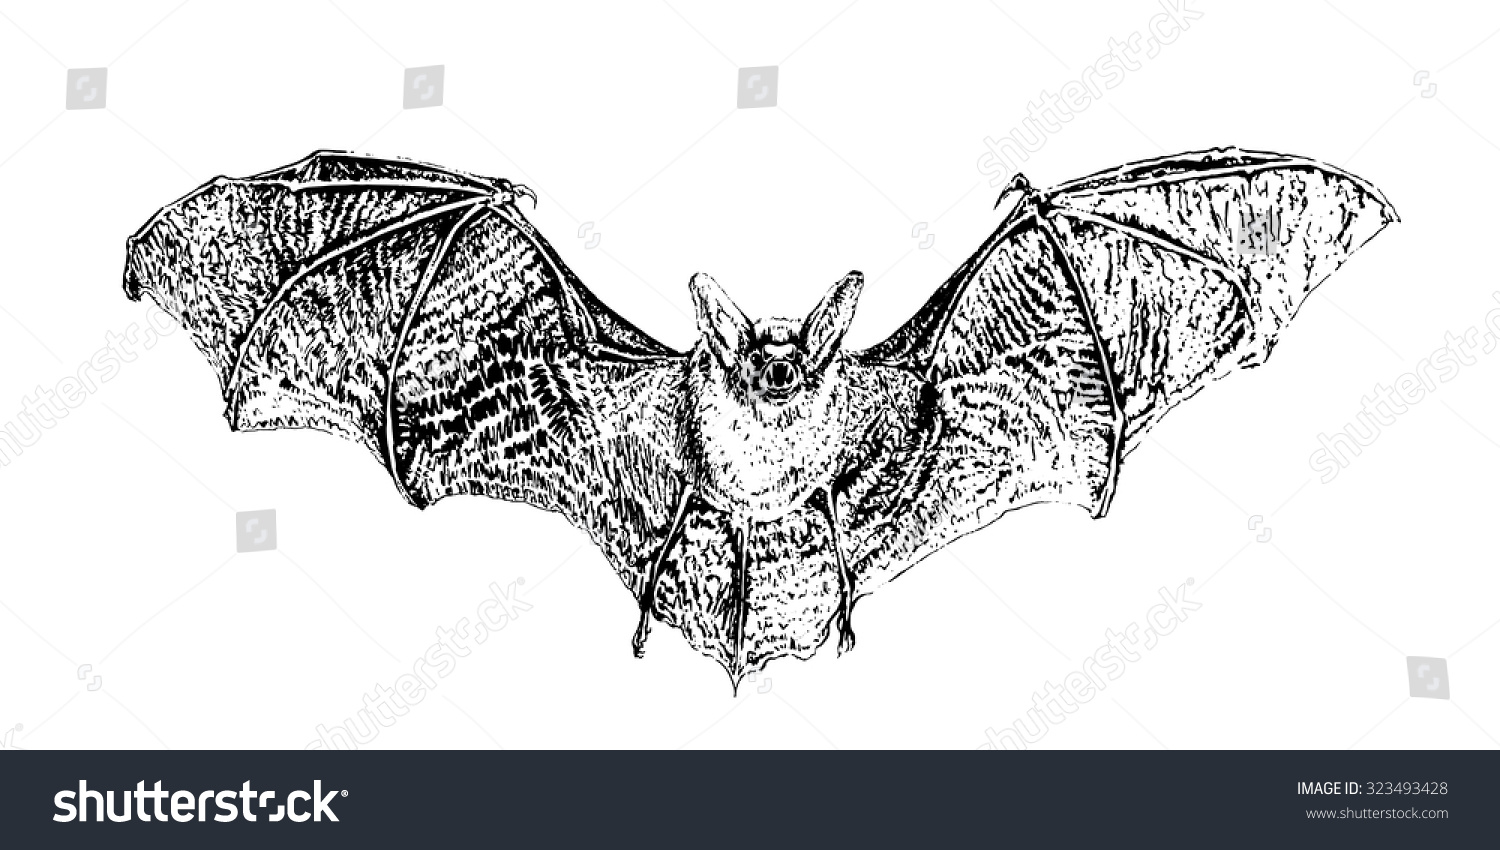 Bat Extended Wings Hand Drawn Vector Stock Vector (Royalty Free) 323493428